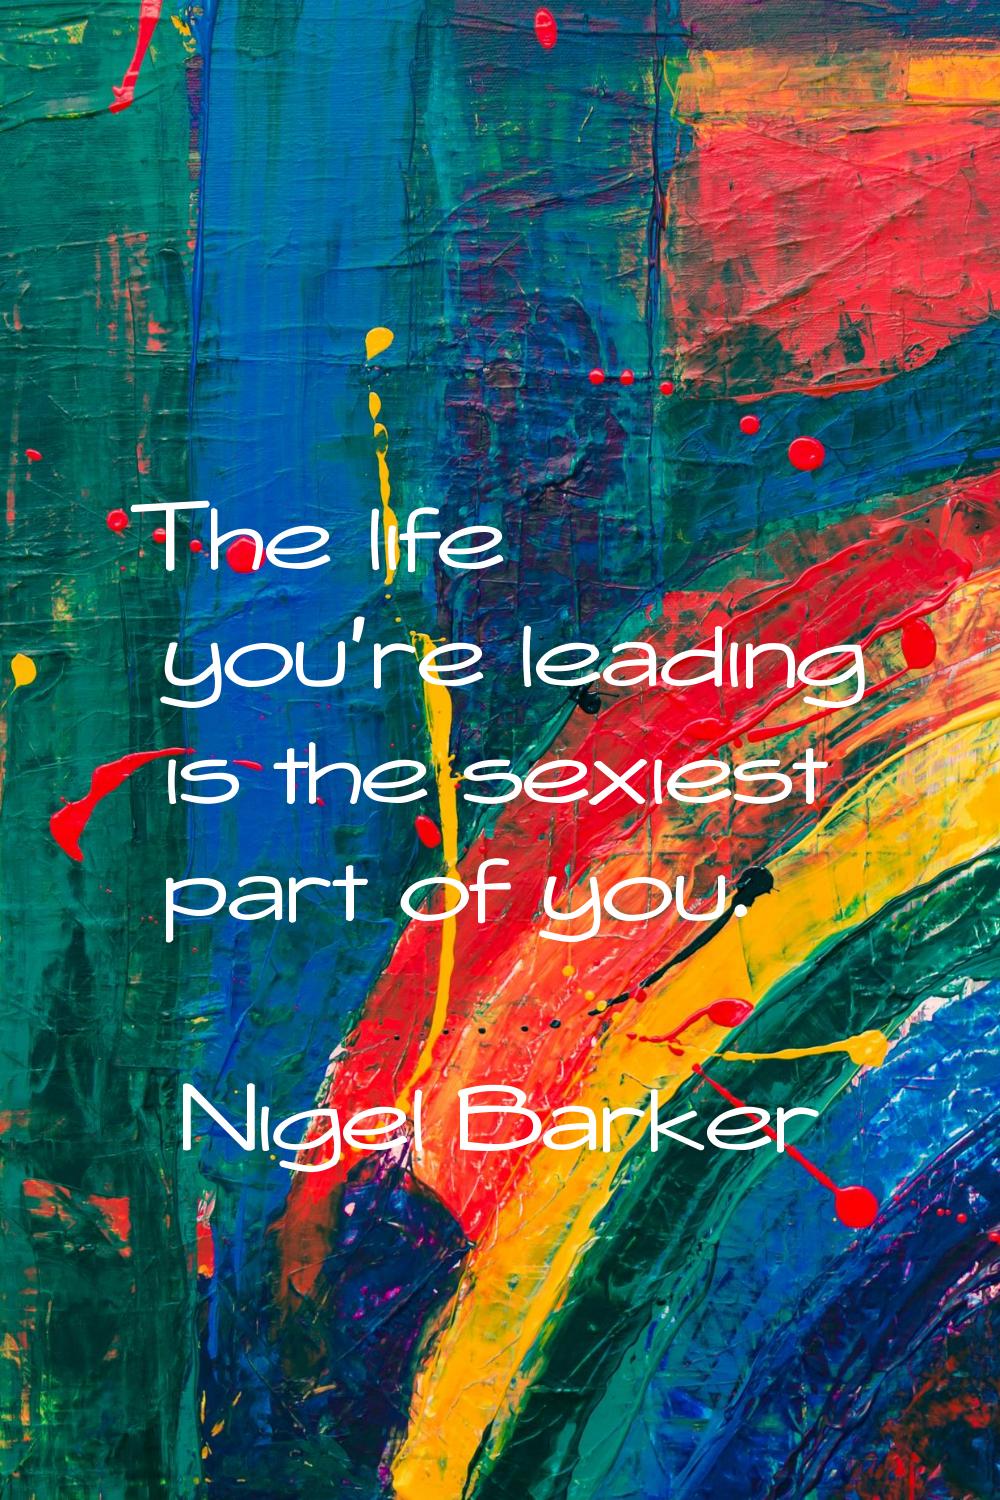 The life you're leading is the sexiest part of you.